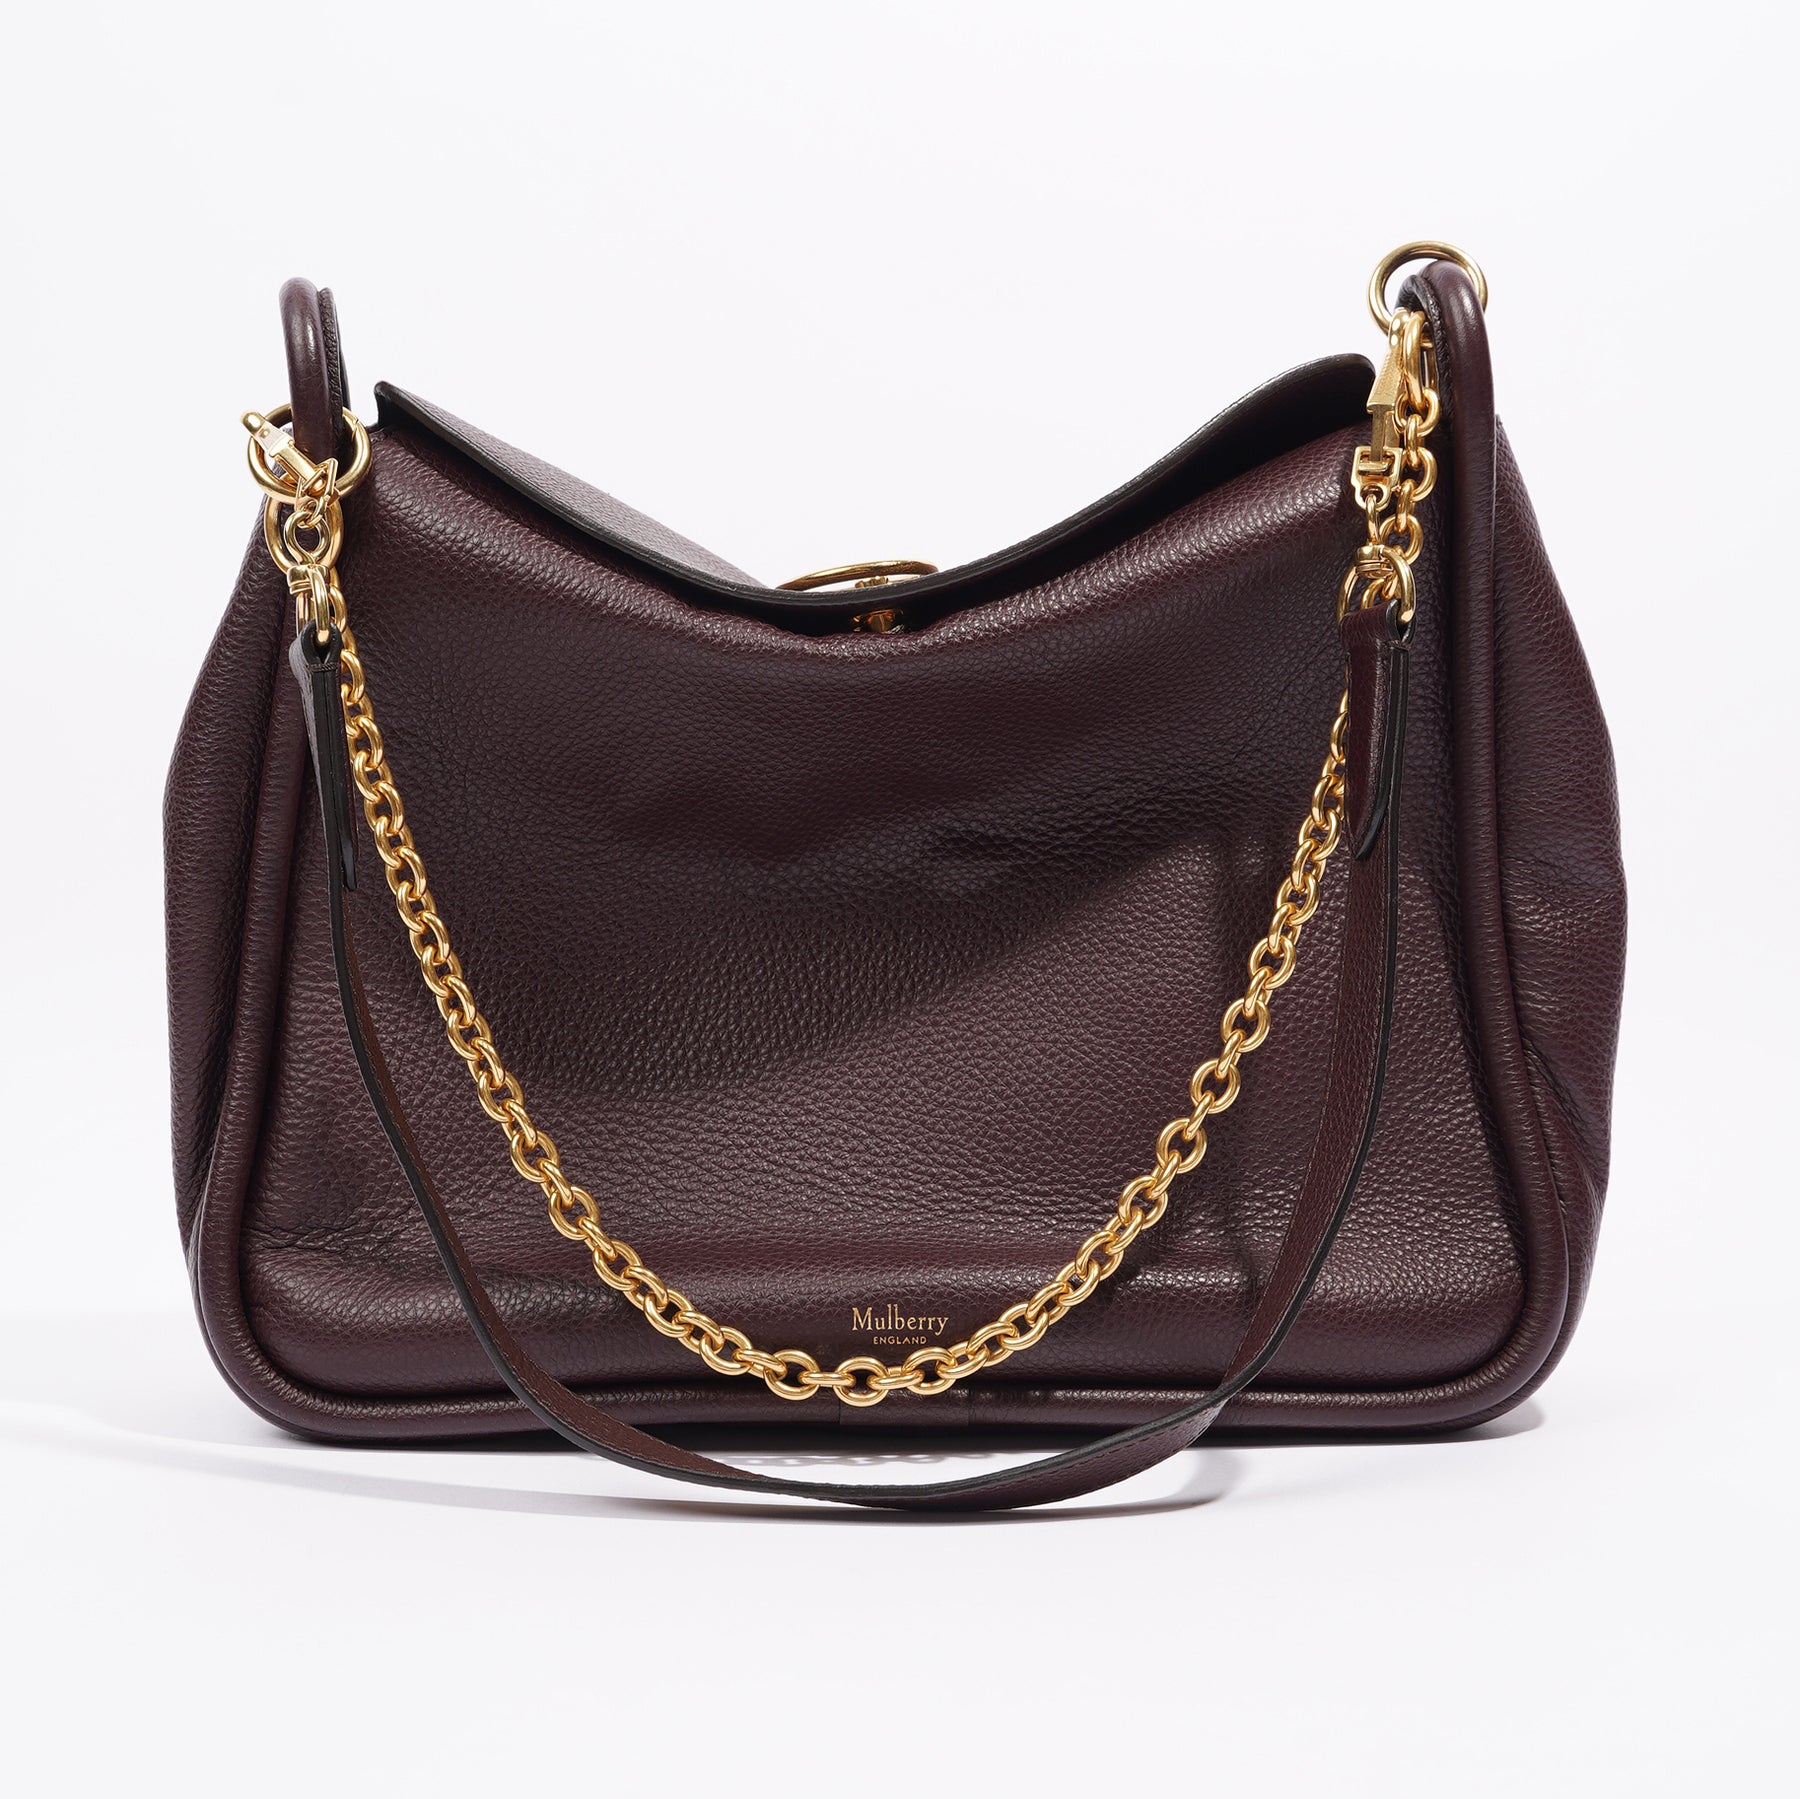 Seaton leather handbag Mulberry Burgundy in Leather - 36236397